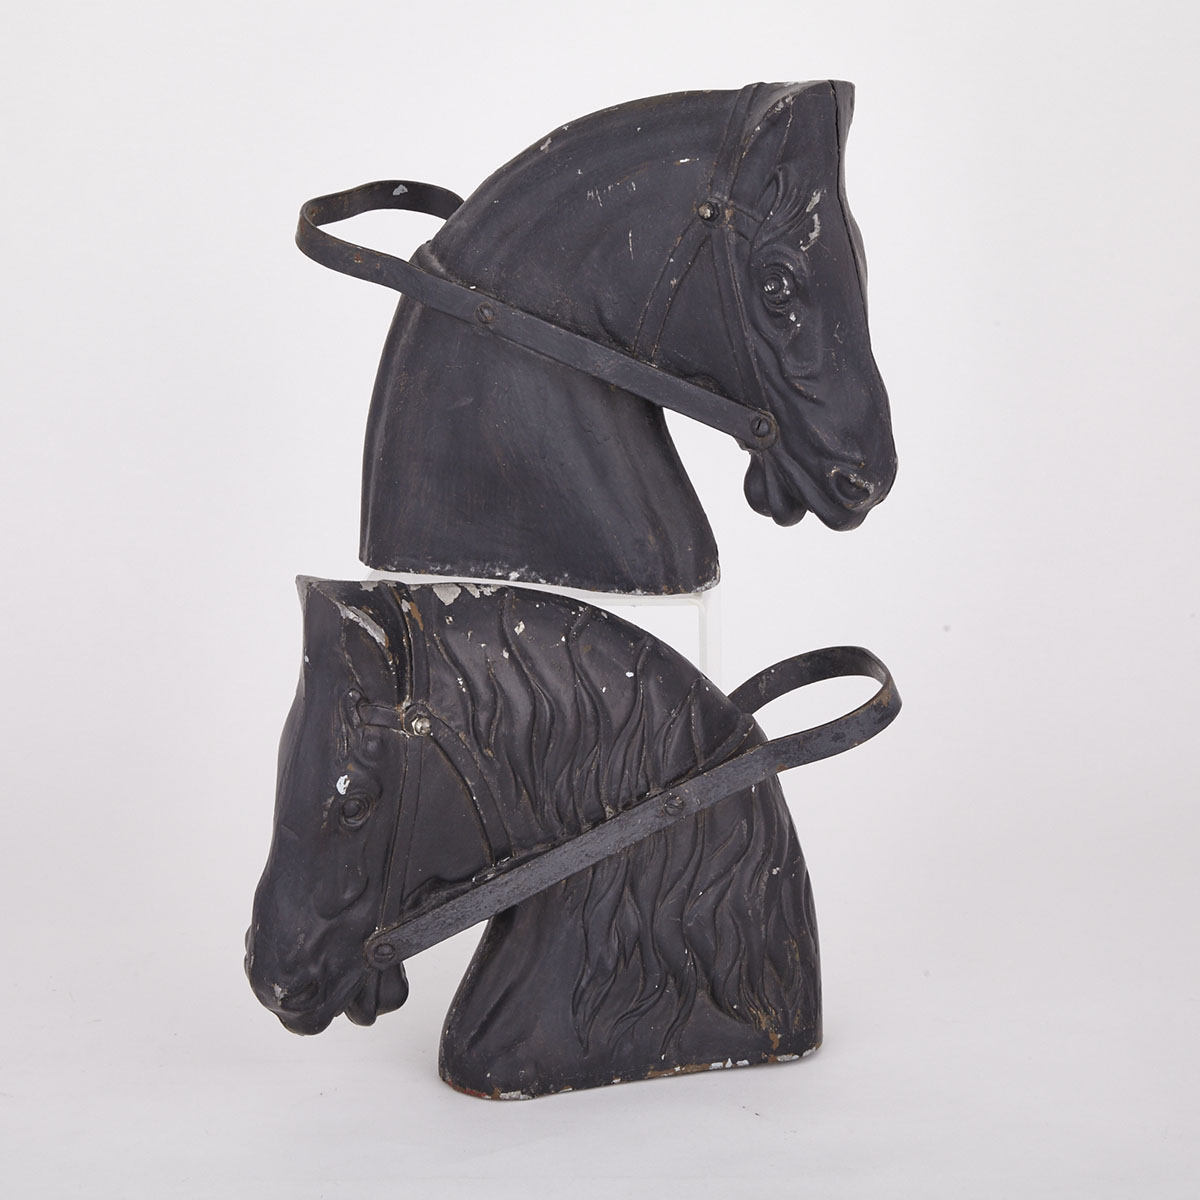 Two Painted White Metal Carousel Horse Heads, c.1900